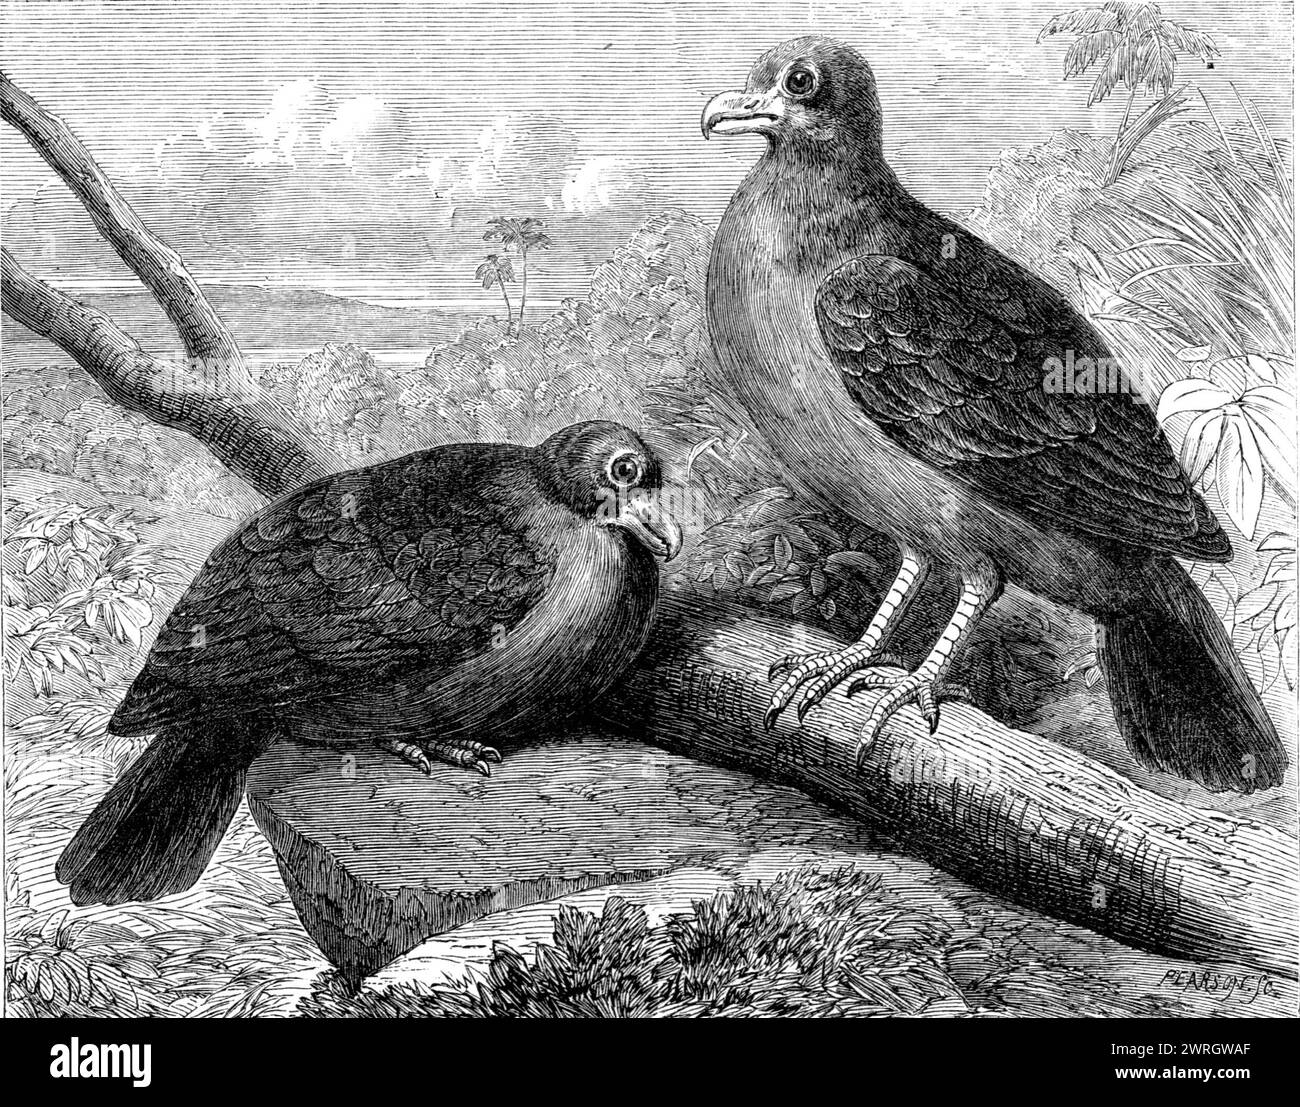 Rare birds From Navigators' Islands: the Didunculus strigirostris or tooth-billed pigeon, 1864. Engraving from a drawing by E. Thomas. 'A notice of this singular bird, which had been considered nearly extinct, will, no doubt, be of interest to ornithologists...The didunculus has a very limited range of habitation. It has only been found in the Samoan or Navigators' Islands. It received the generic name of didunculus, or Little Dodo, from its resemblance to that celebrated extinct bird the Dodo, like which, the didunculus combines in its form the character of a rapacious bird with that of the h Stock Photo